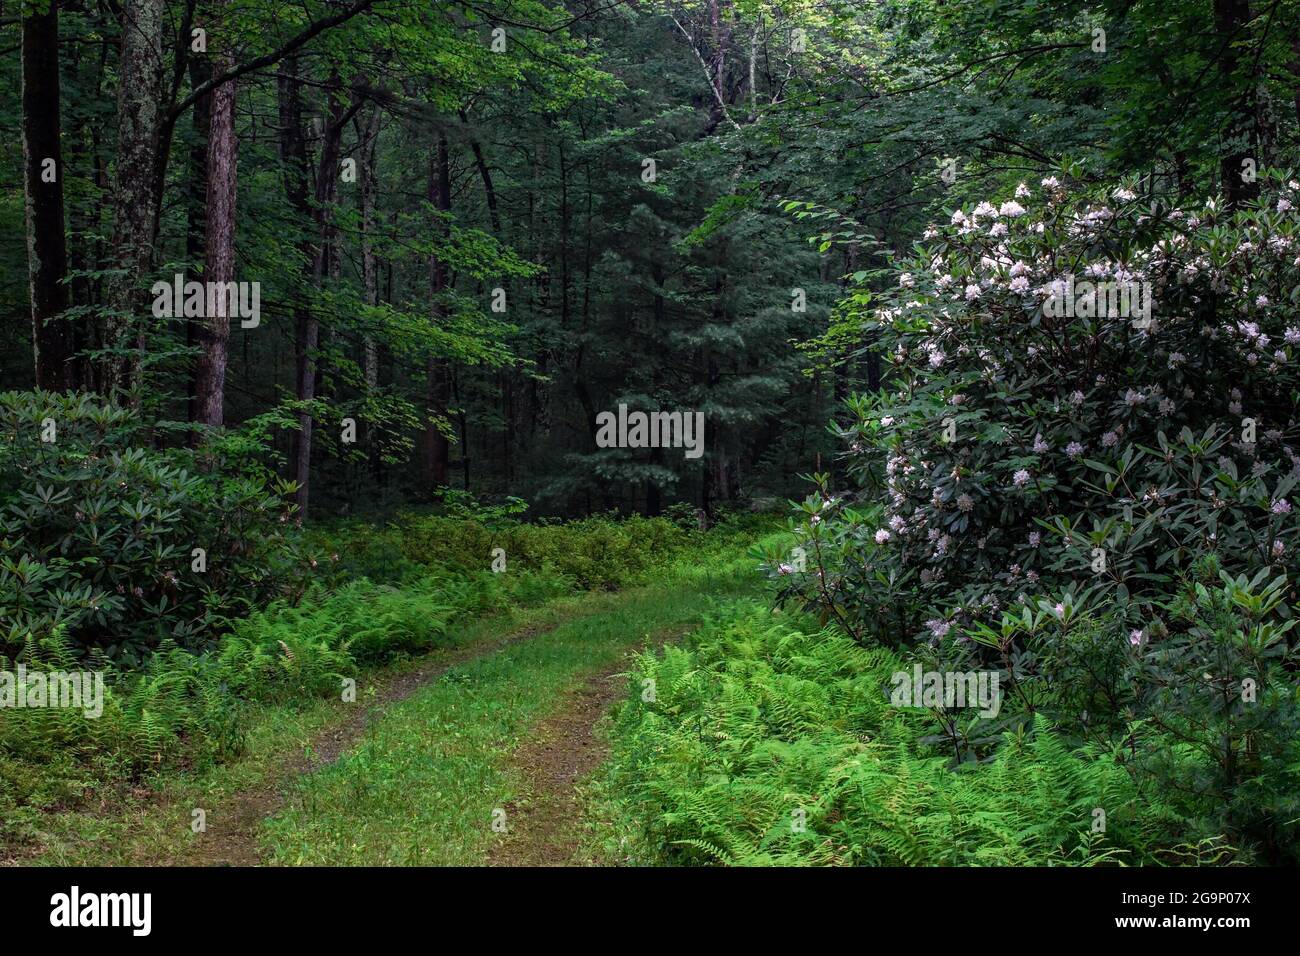 A trail through the Delaware State Forest in July during the blooming of rhododendron in Pennsylvania's Pocono Mountains. Stock Photo